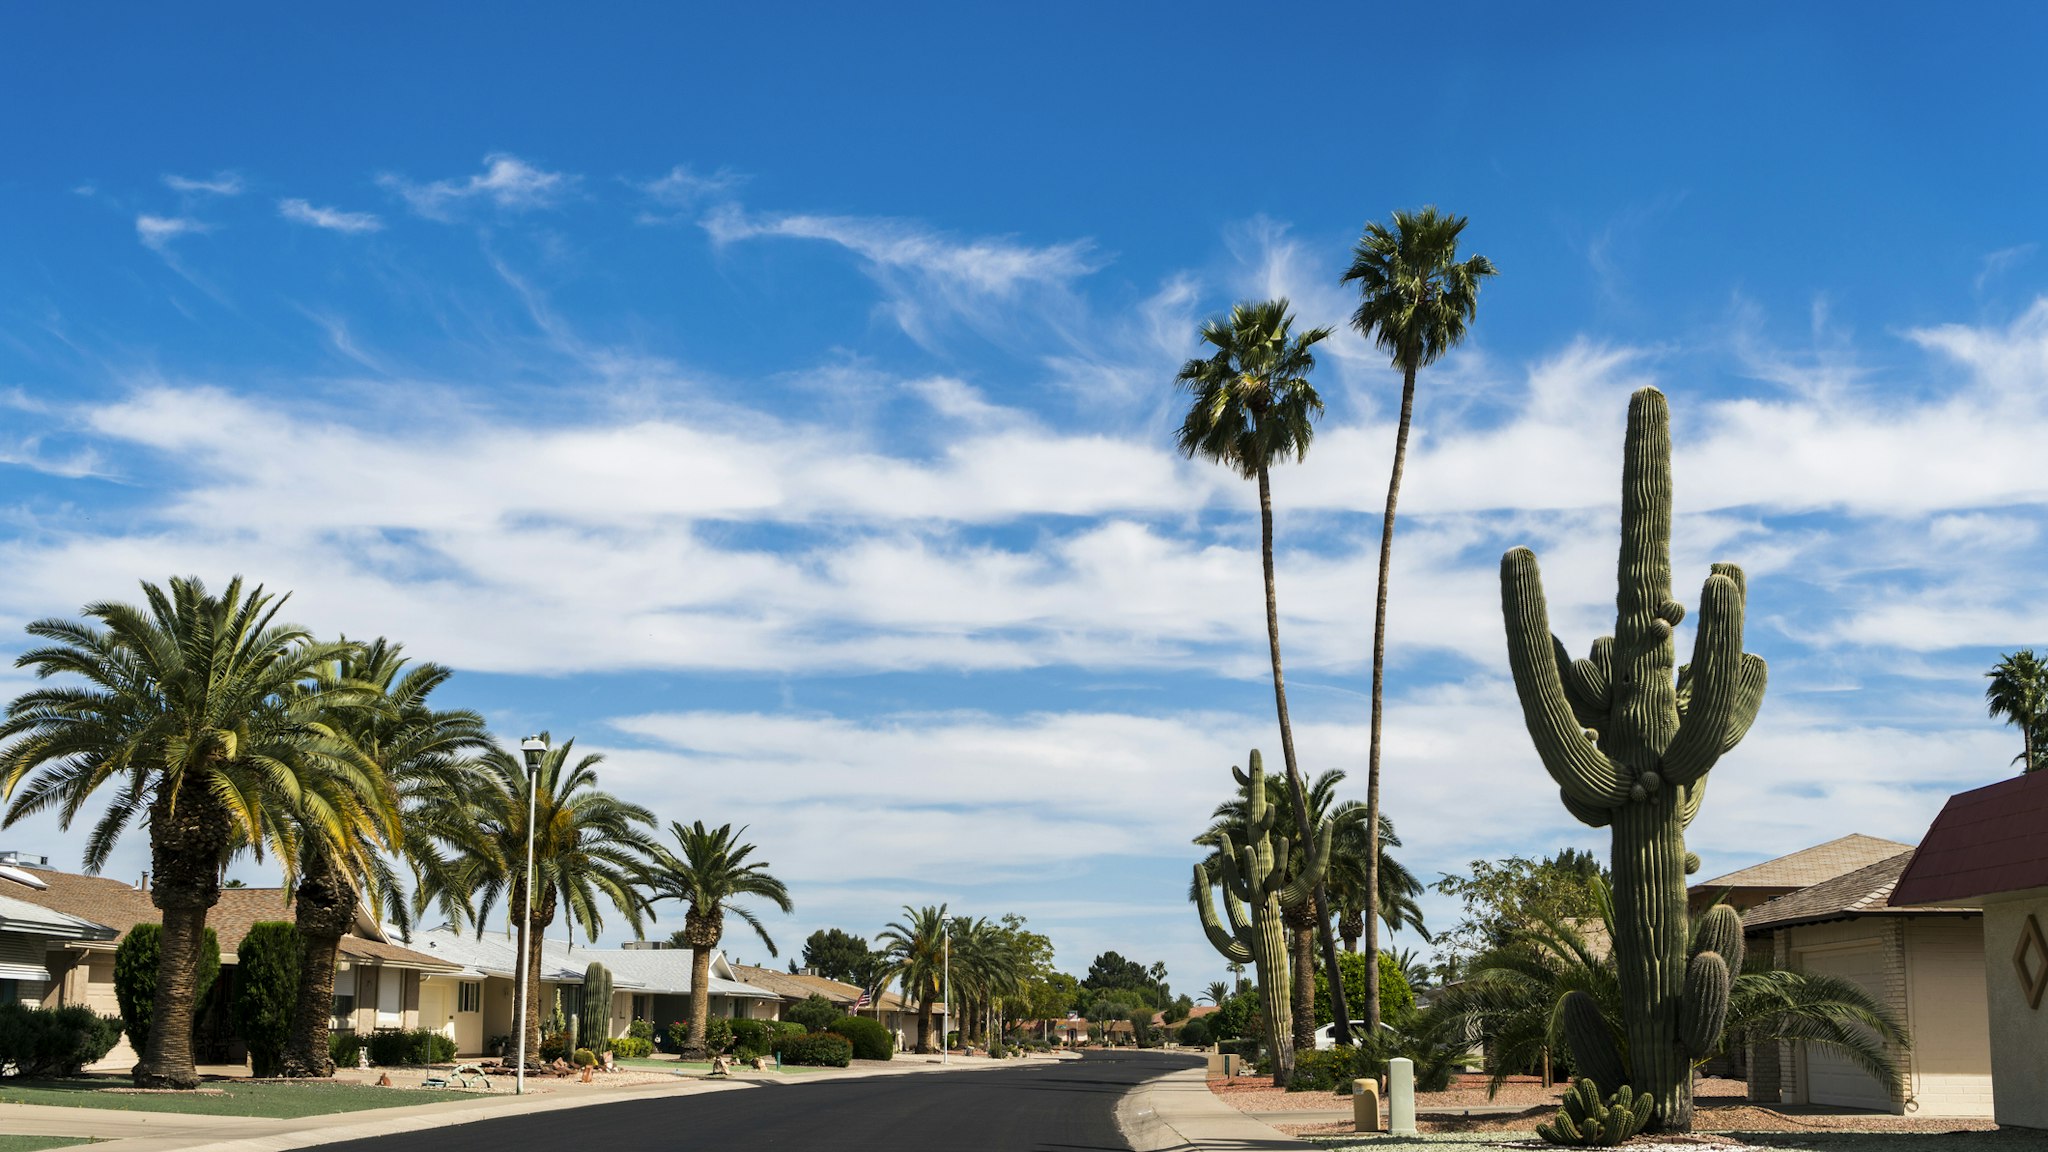 Sun City NW of Phoenix Arizona. A community dedicated to a more leisurely lifestyle and unending choices of recreation for the retired, active adult. A community of pristine streets and well maintained gardens.